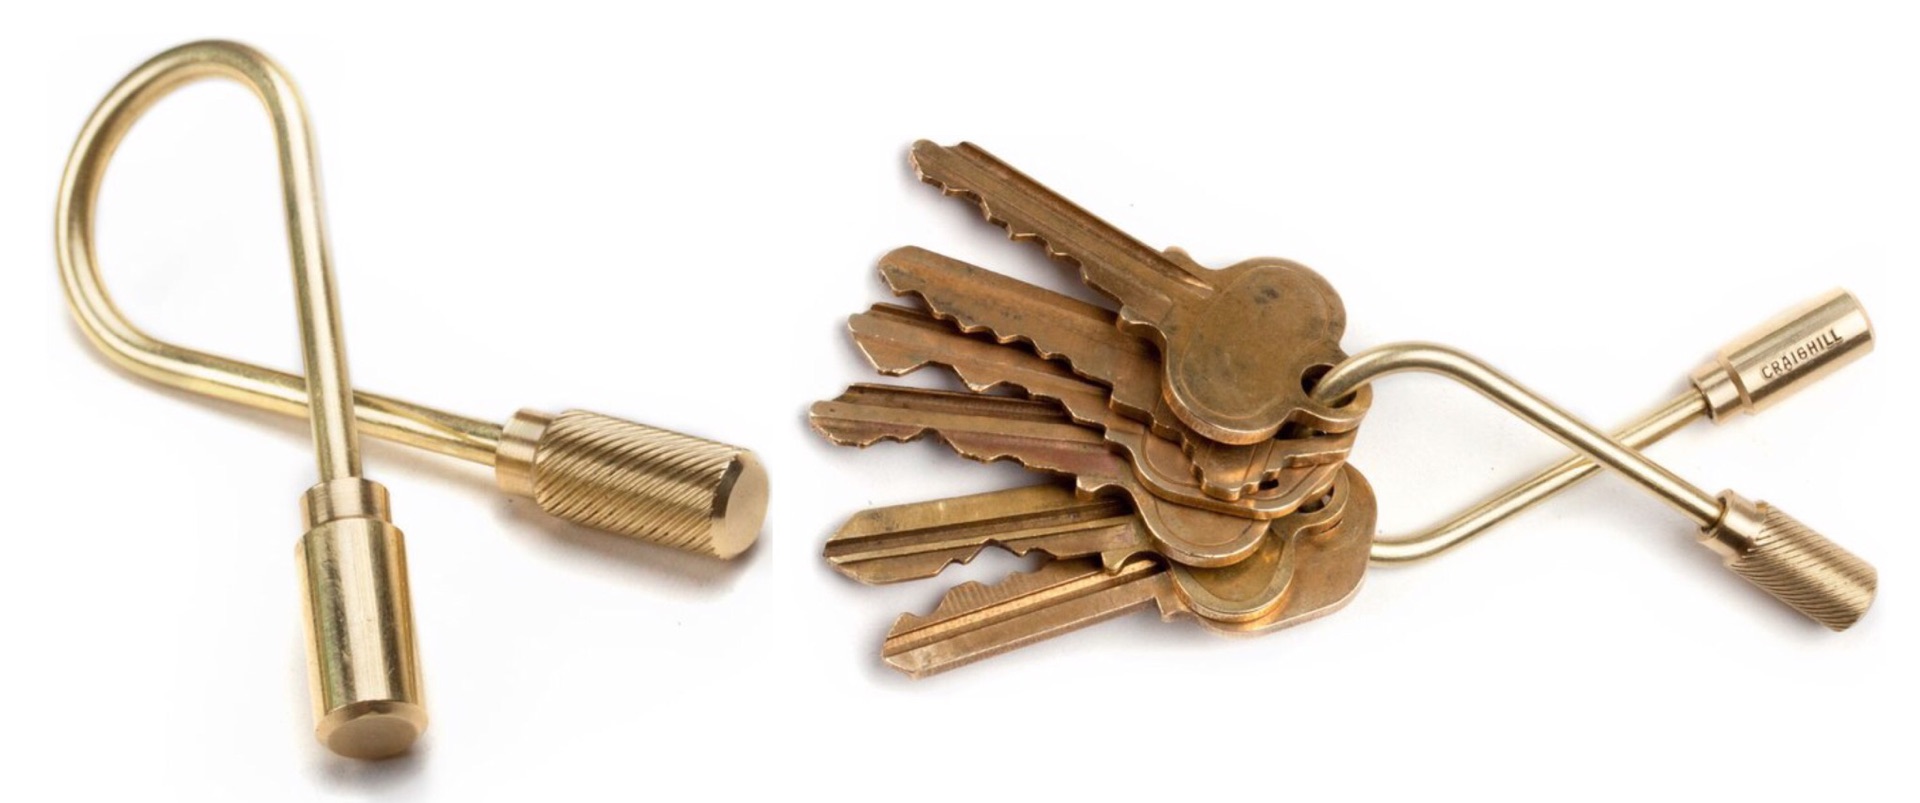 Craighill's closed-helix brass keyring. ($30)